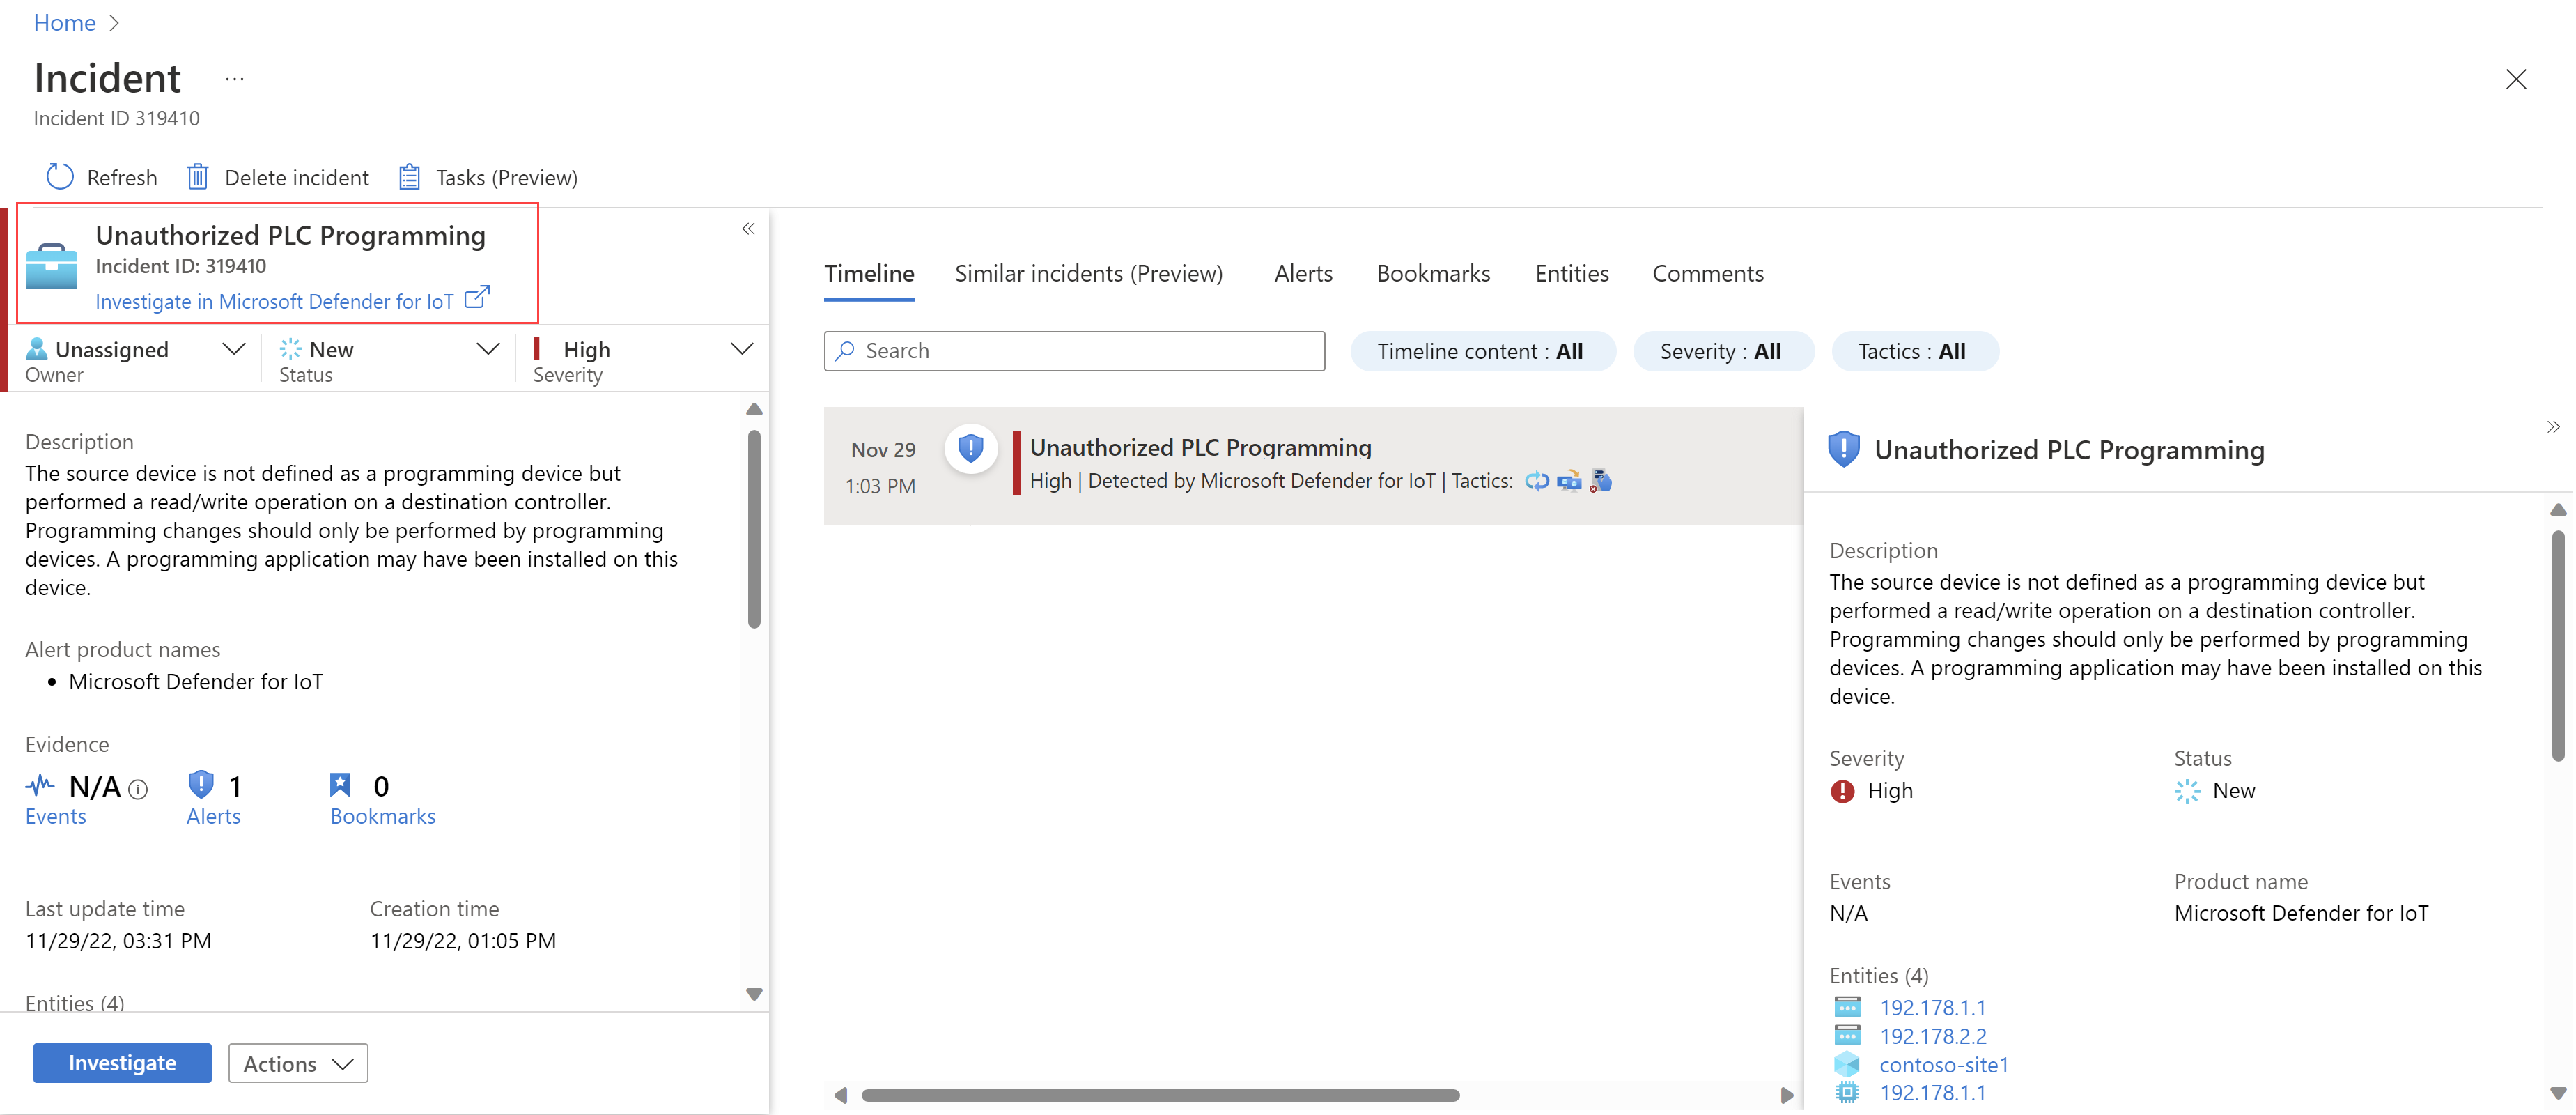 Screenshot of the Investigate in Microsoft Defender for IoT option.